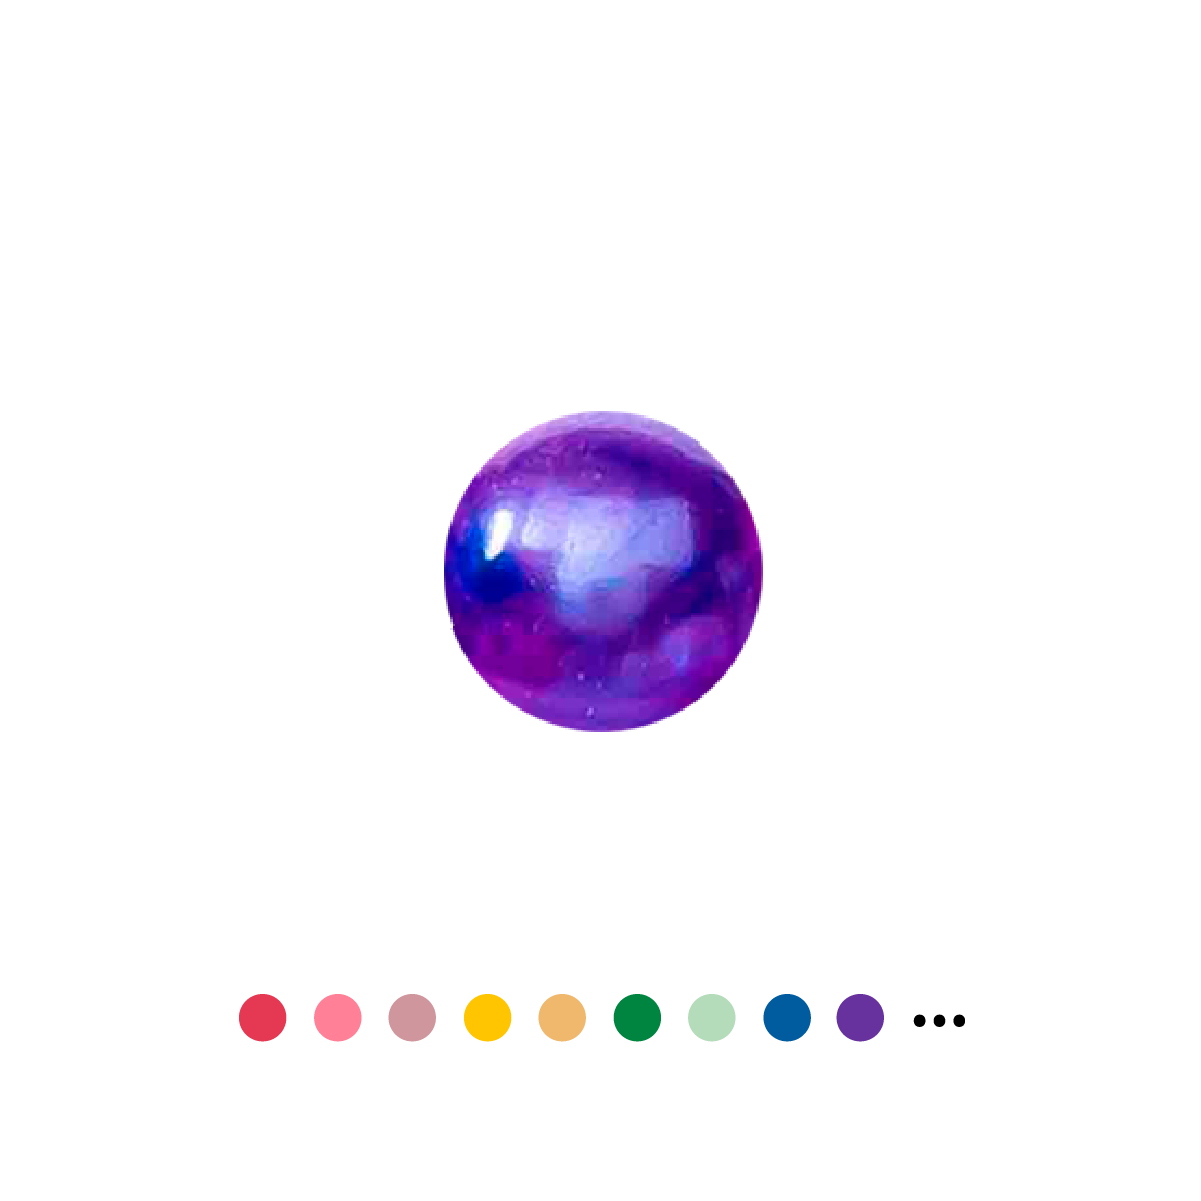 Loose Pearl - Round